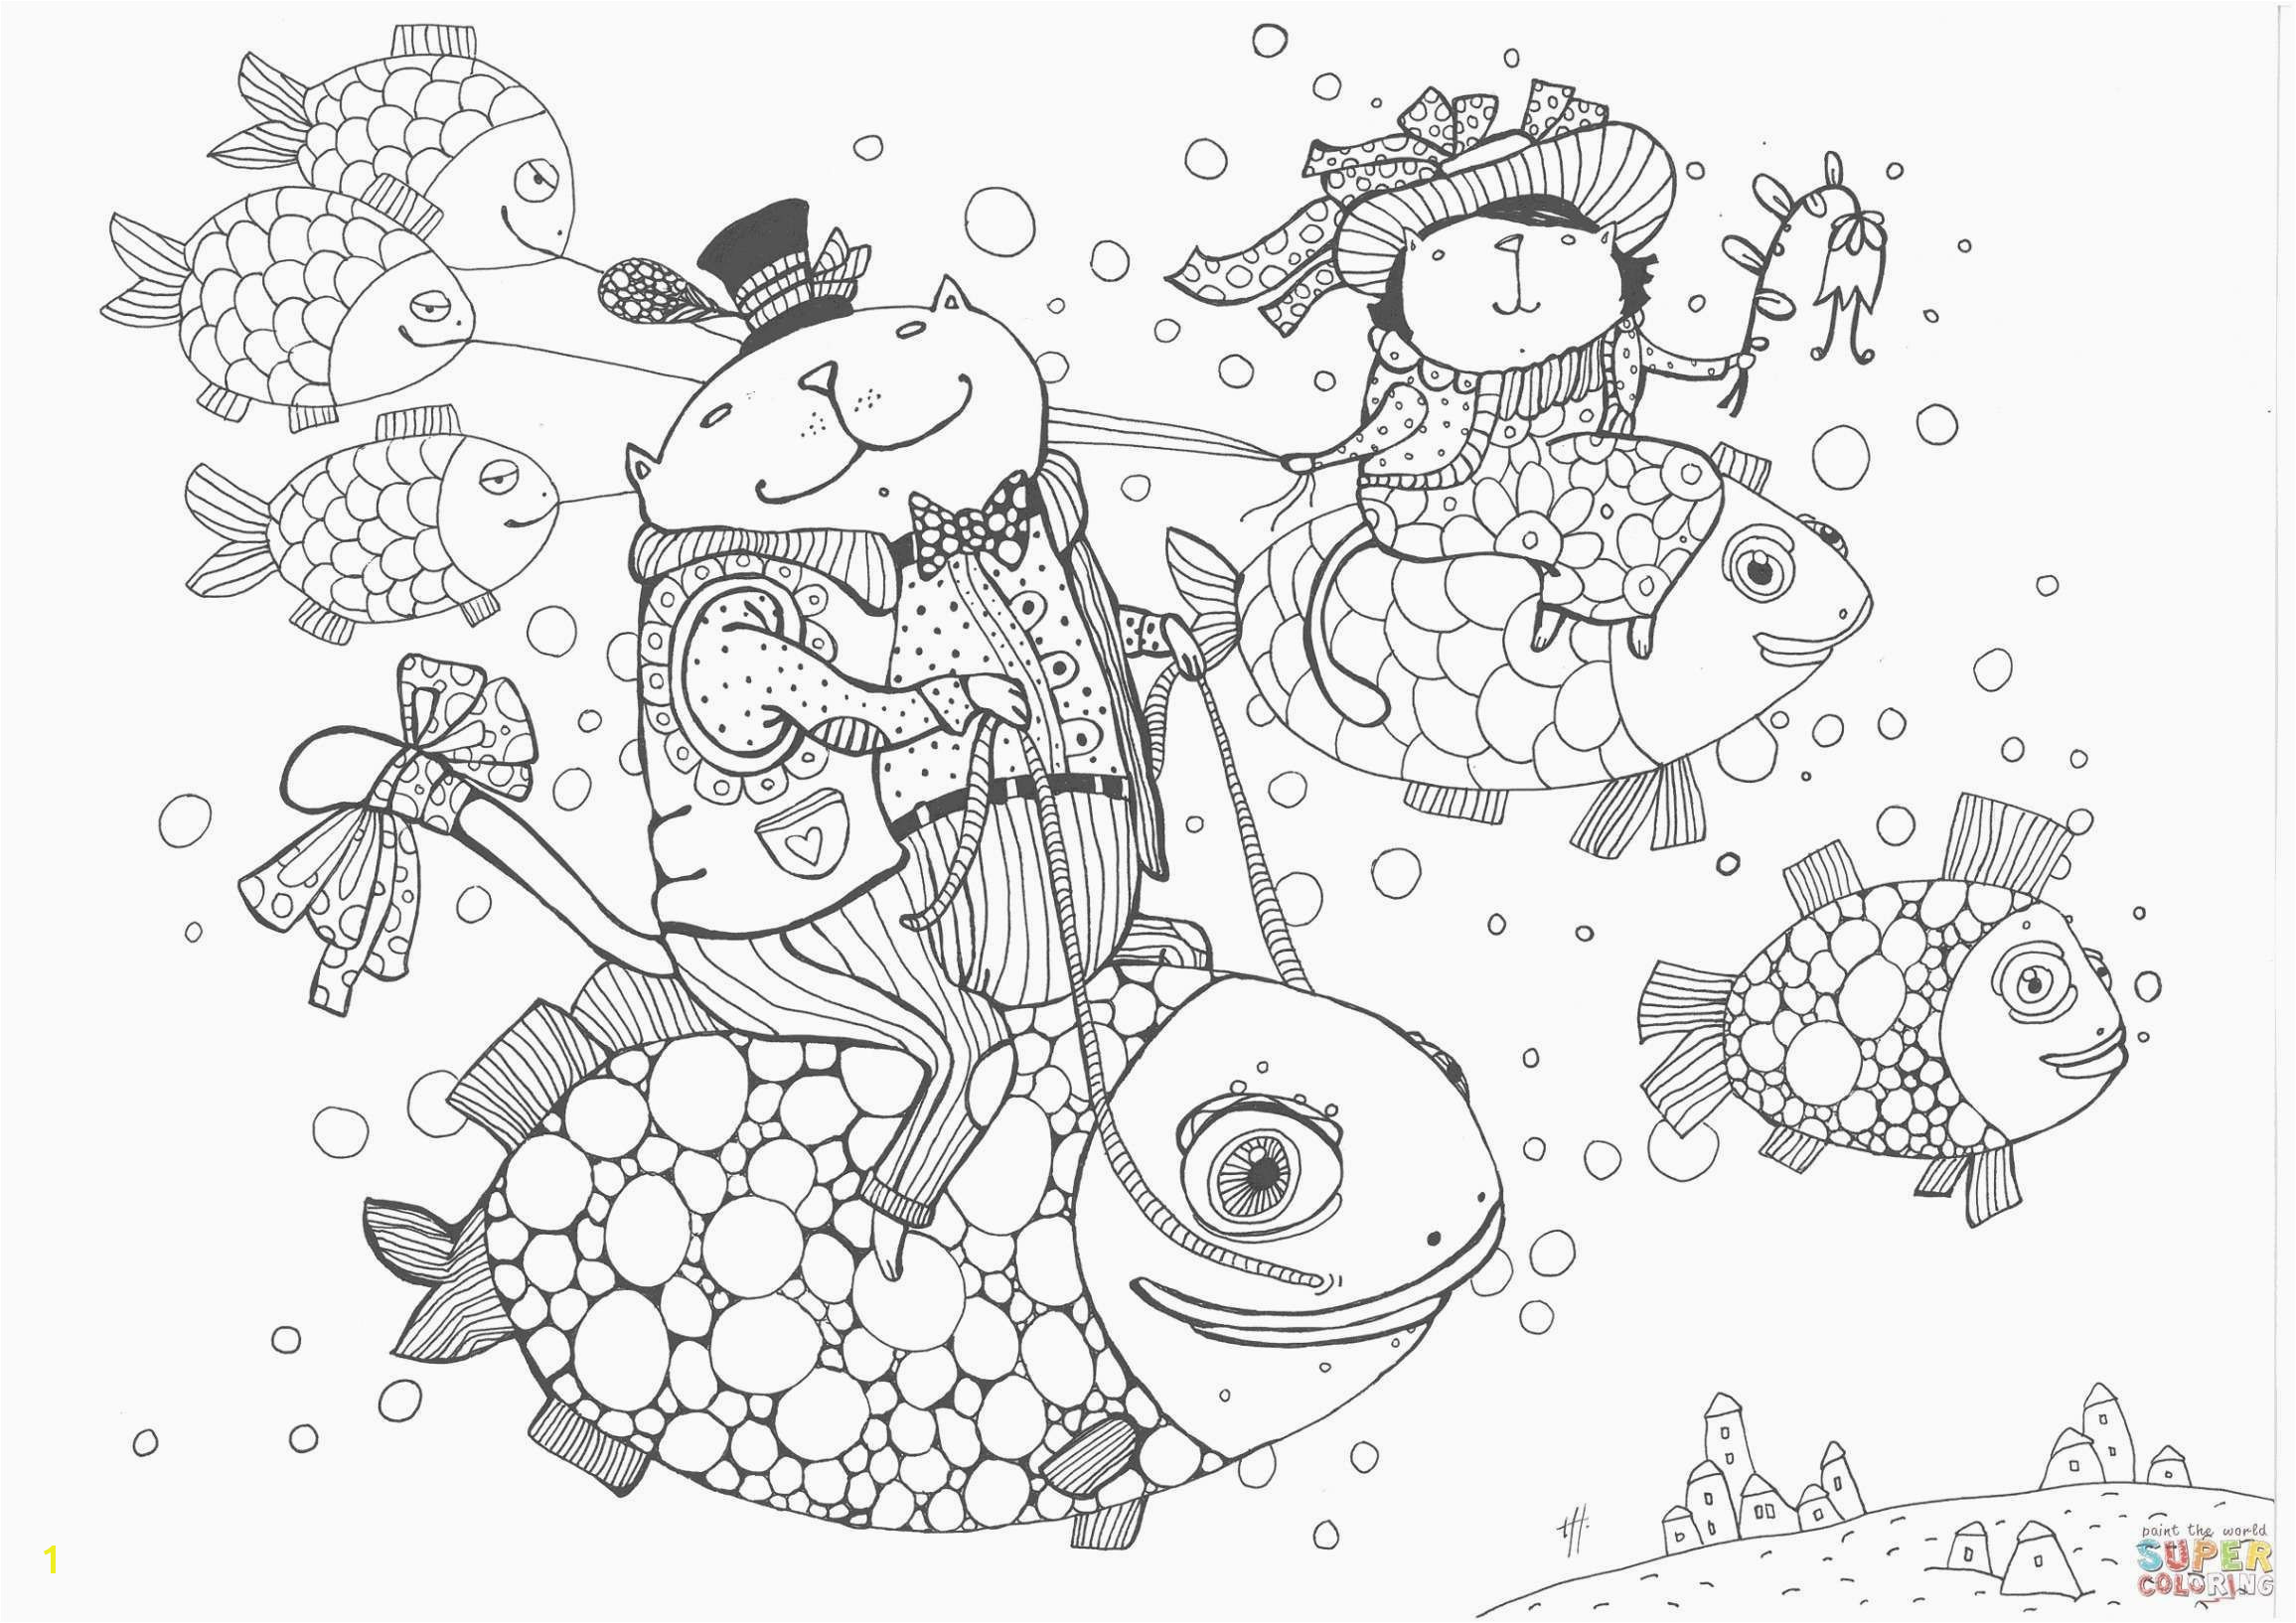 Free Coloring Pages On Bullying Free Coloring Pages Bullying Lovely Christmas Coloring for Free